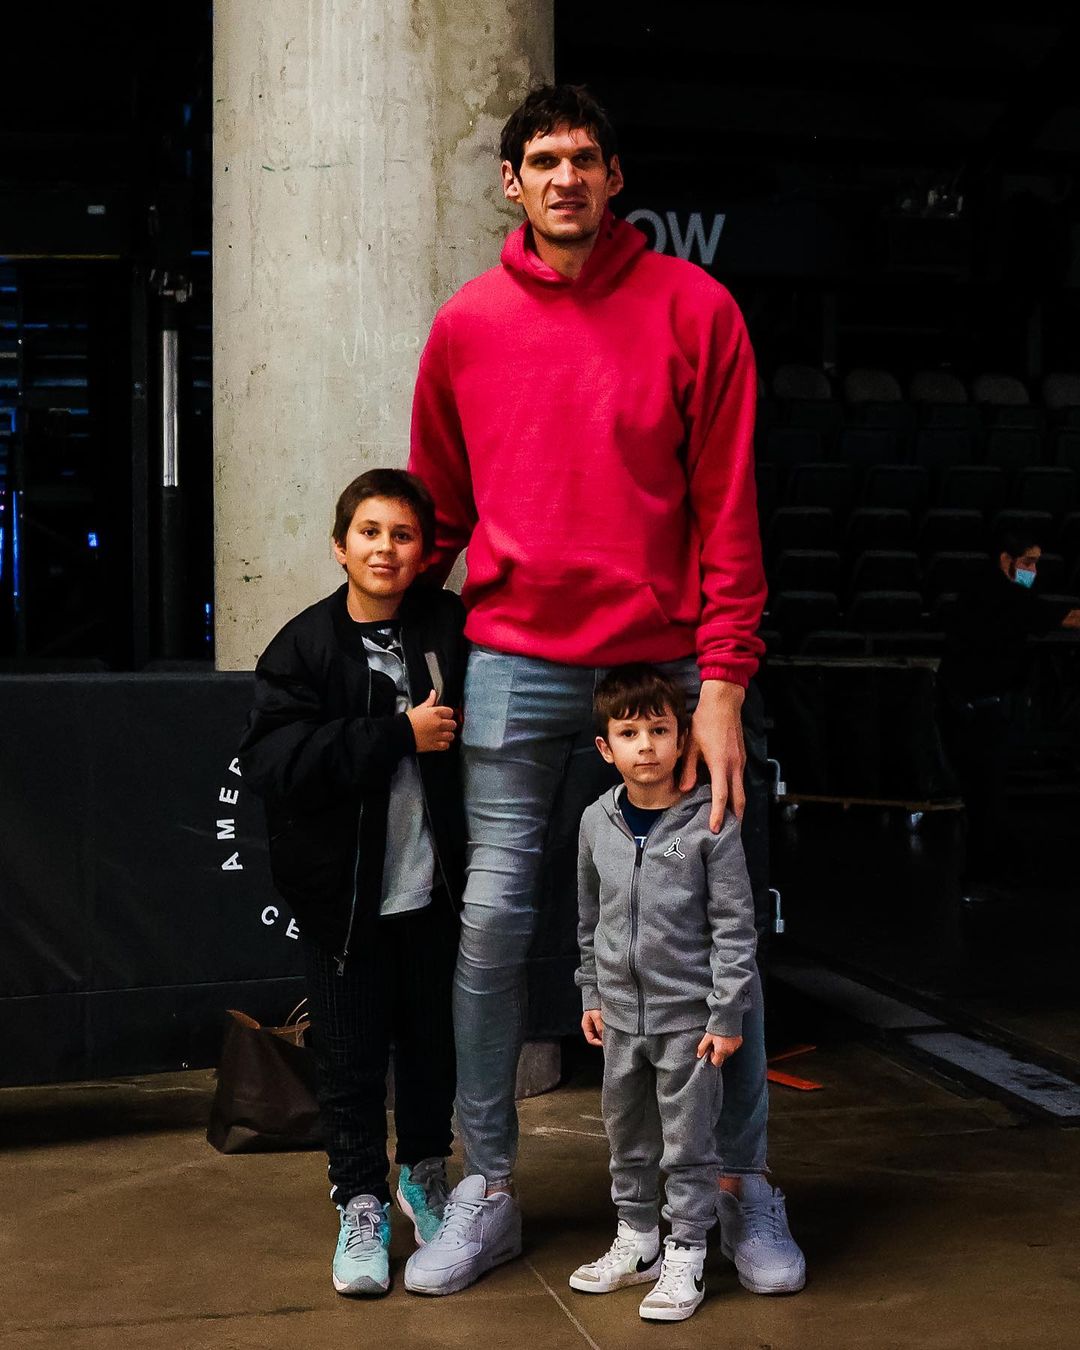 Vuk Marjanović, as seen in a picture with his dad, Boban Marjanovic, and his younger brother, Petar Marjanović.